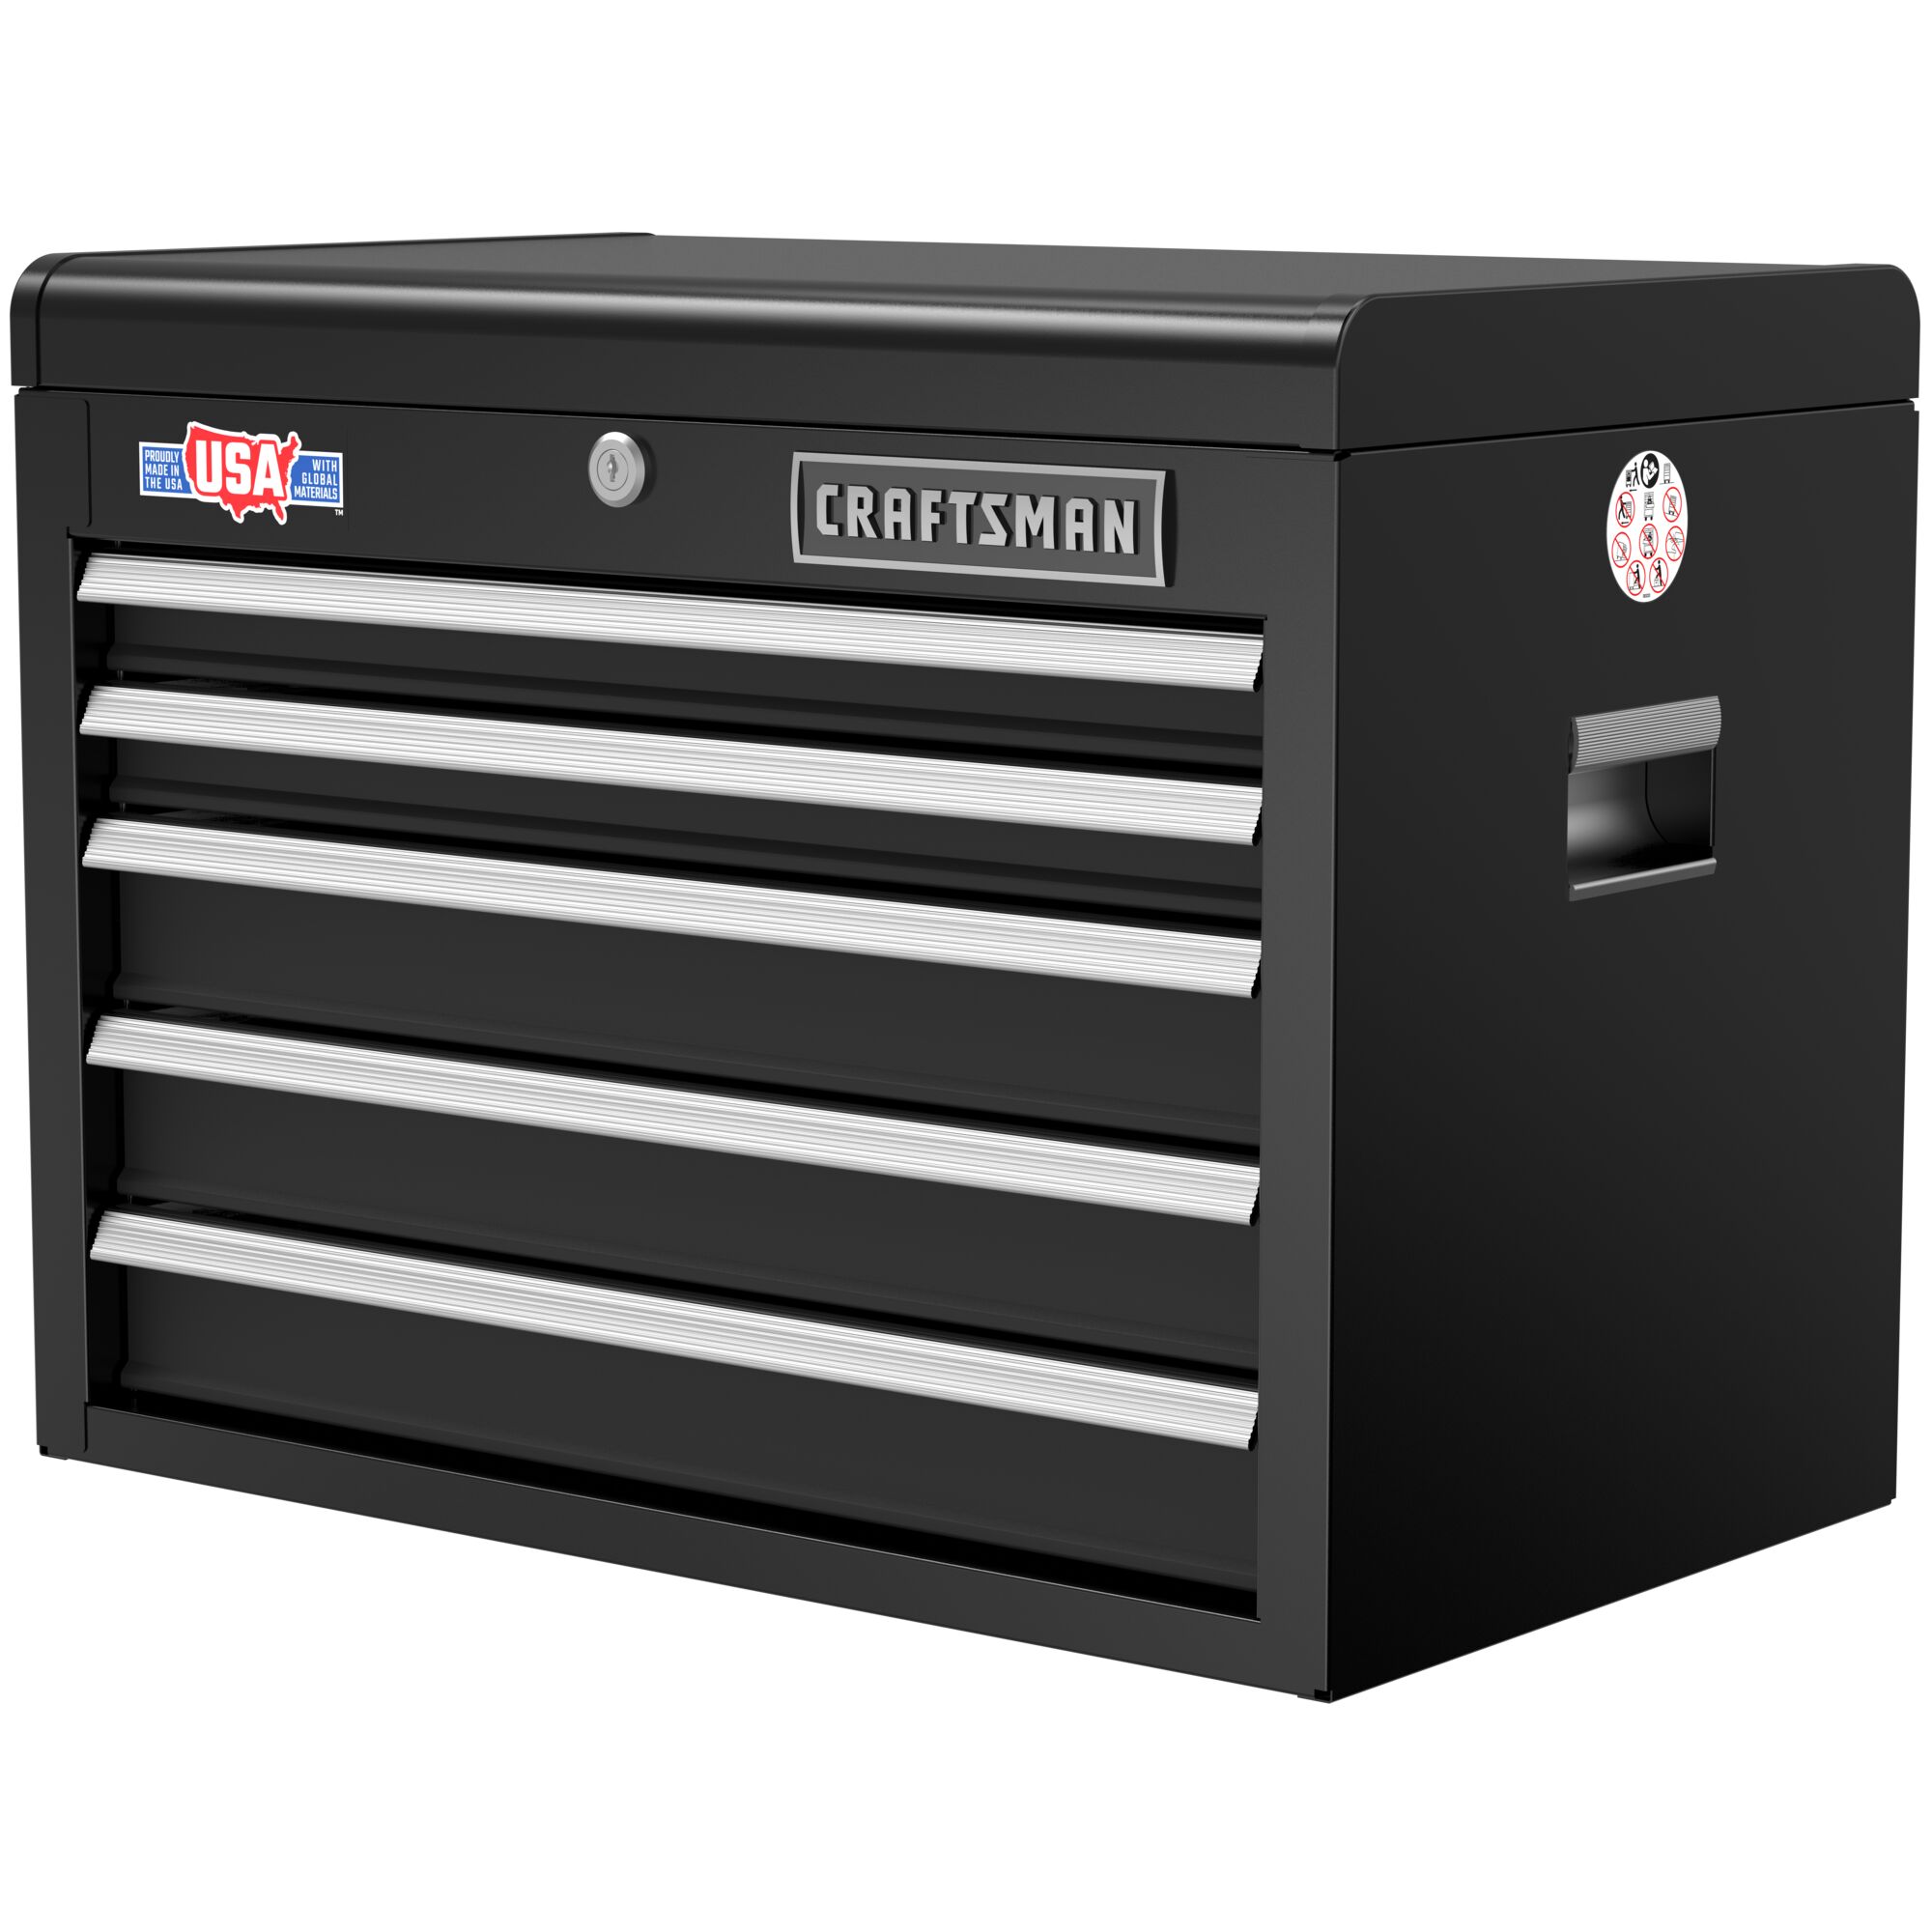 Craftsman 2000 Series 26 In W X 1975 In H 5 Drawer Steel Tool Chest